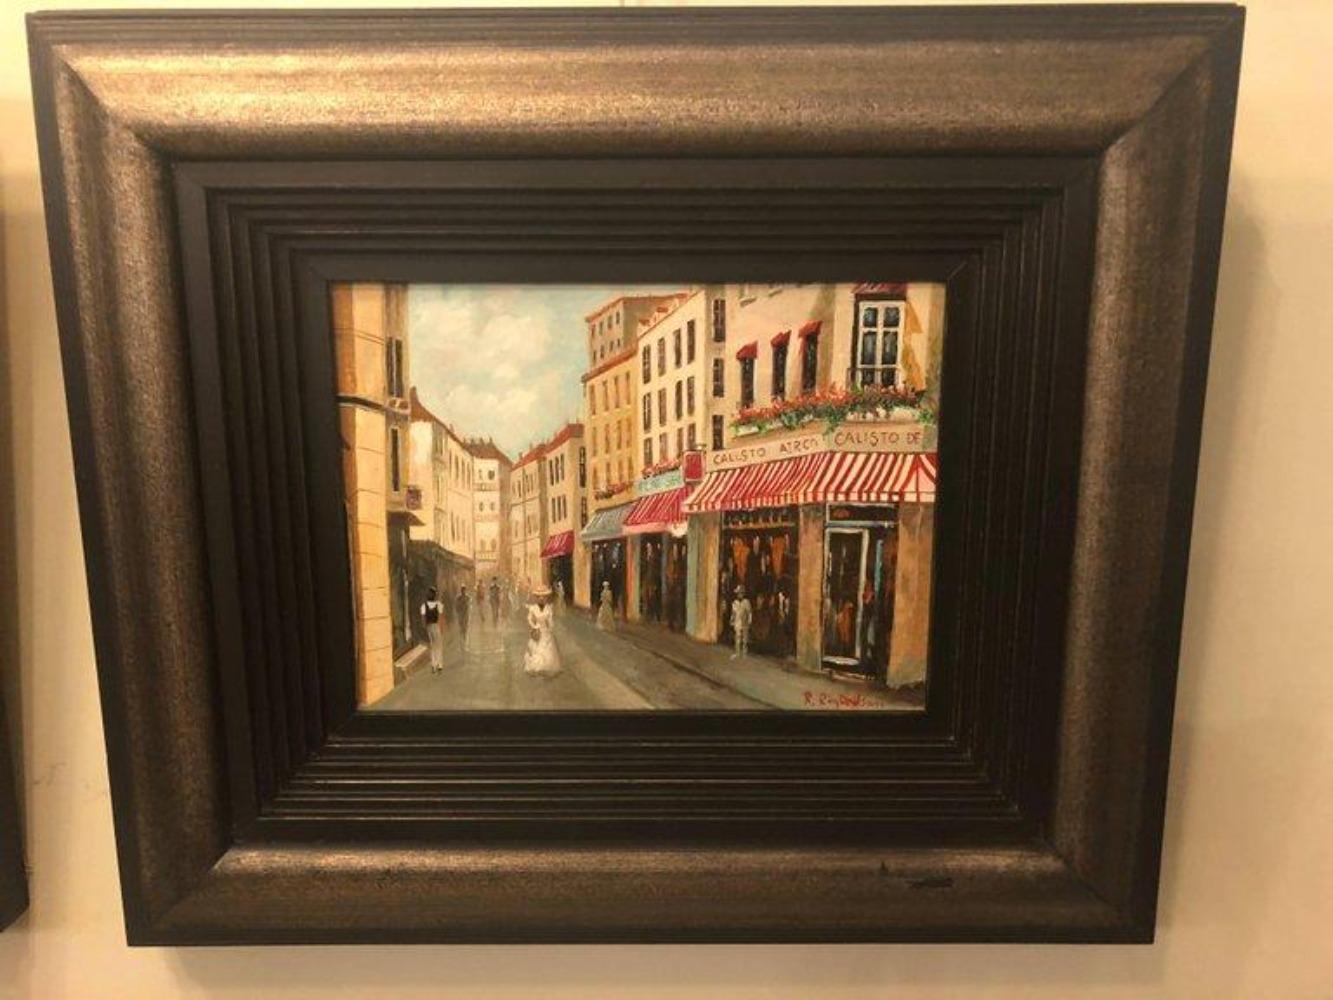 Parisian Street Scenes Oil on Canvas Painting Signed R. Roywilsens, a Pair  For Sale 1